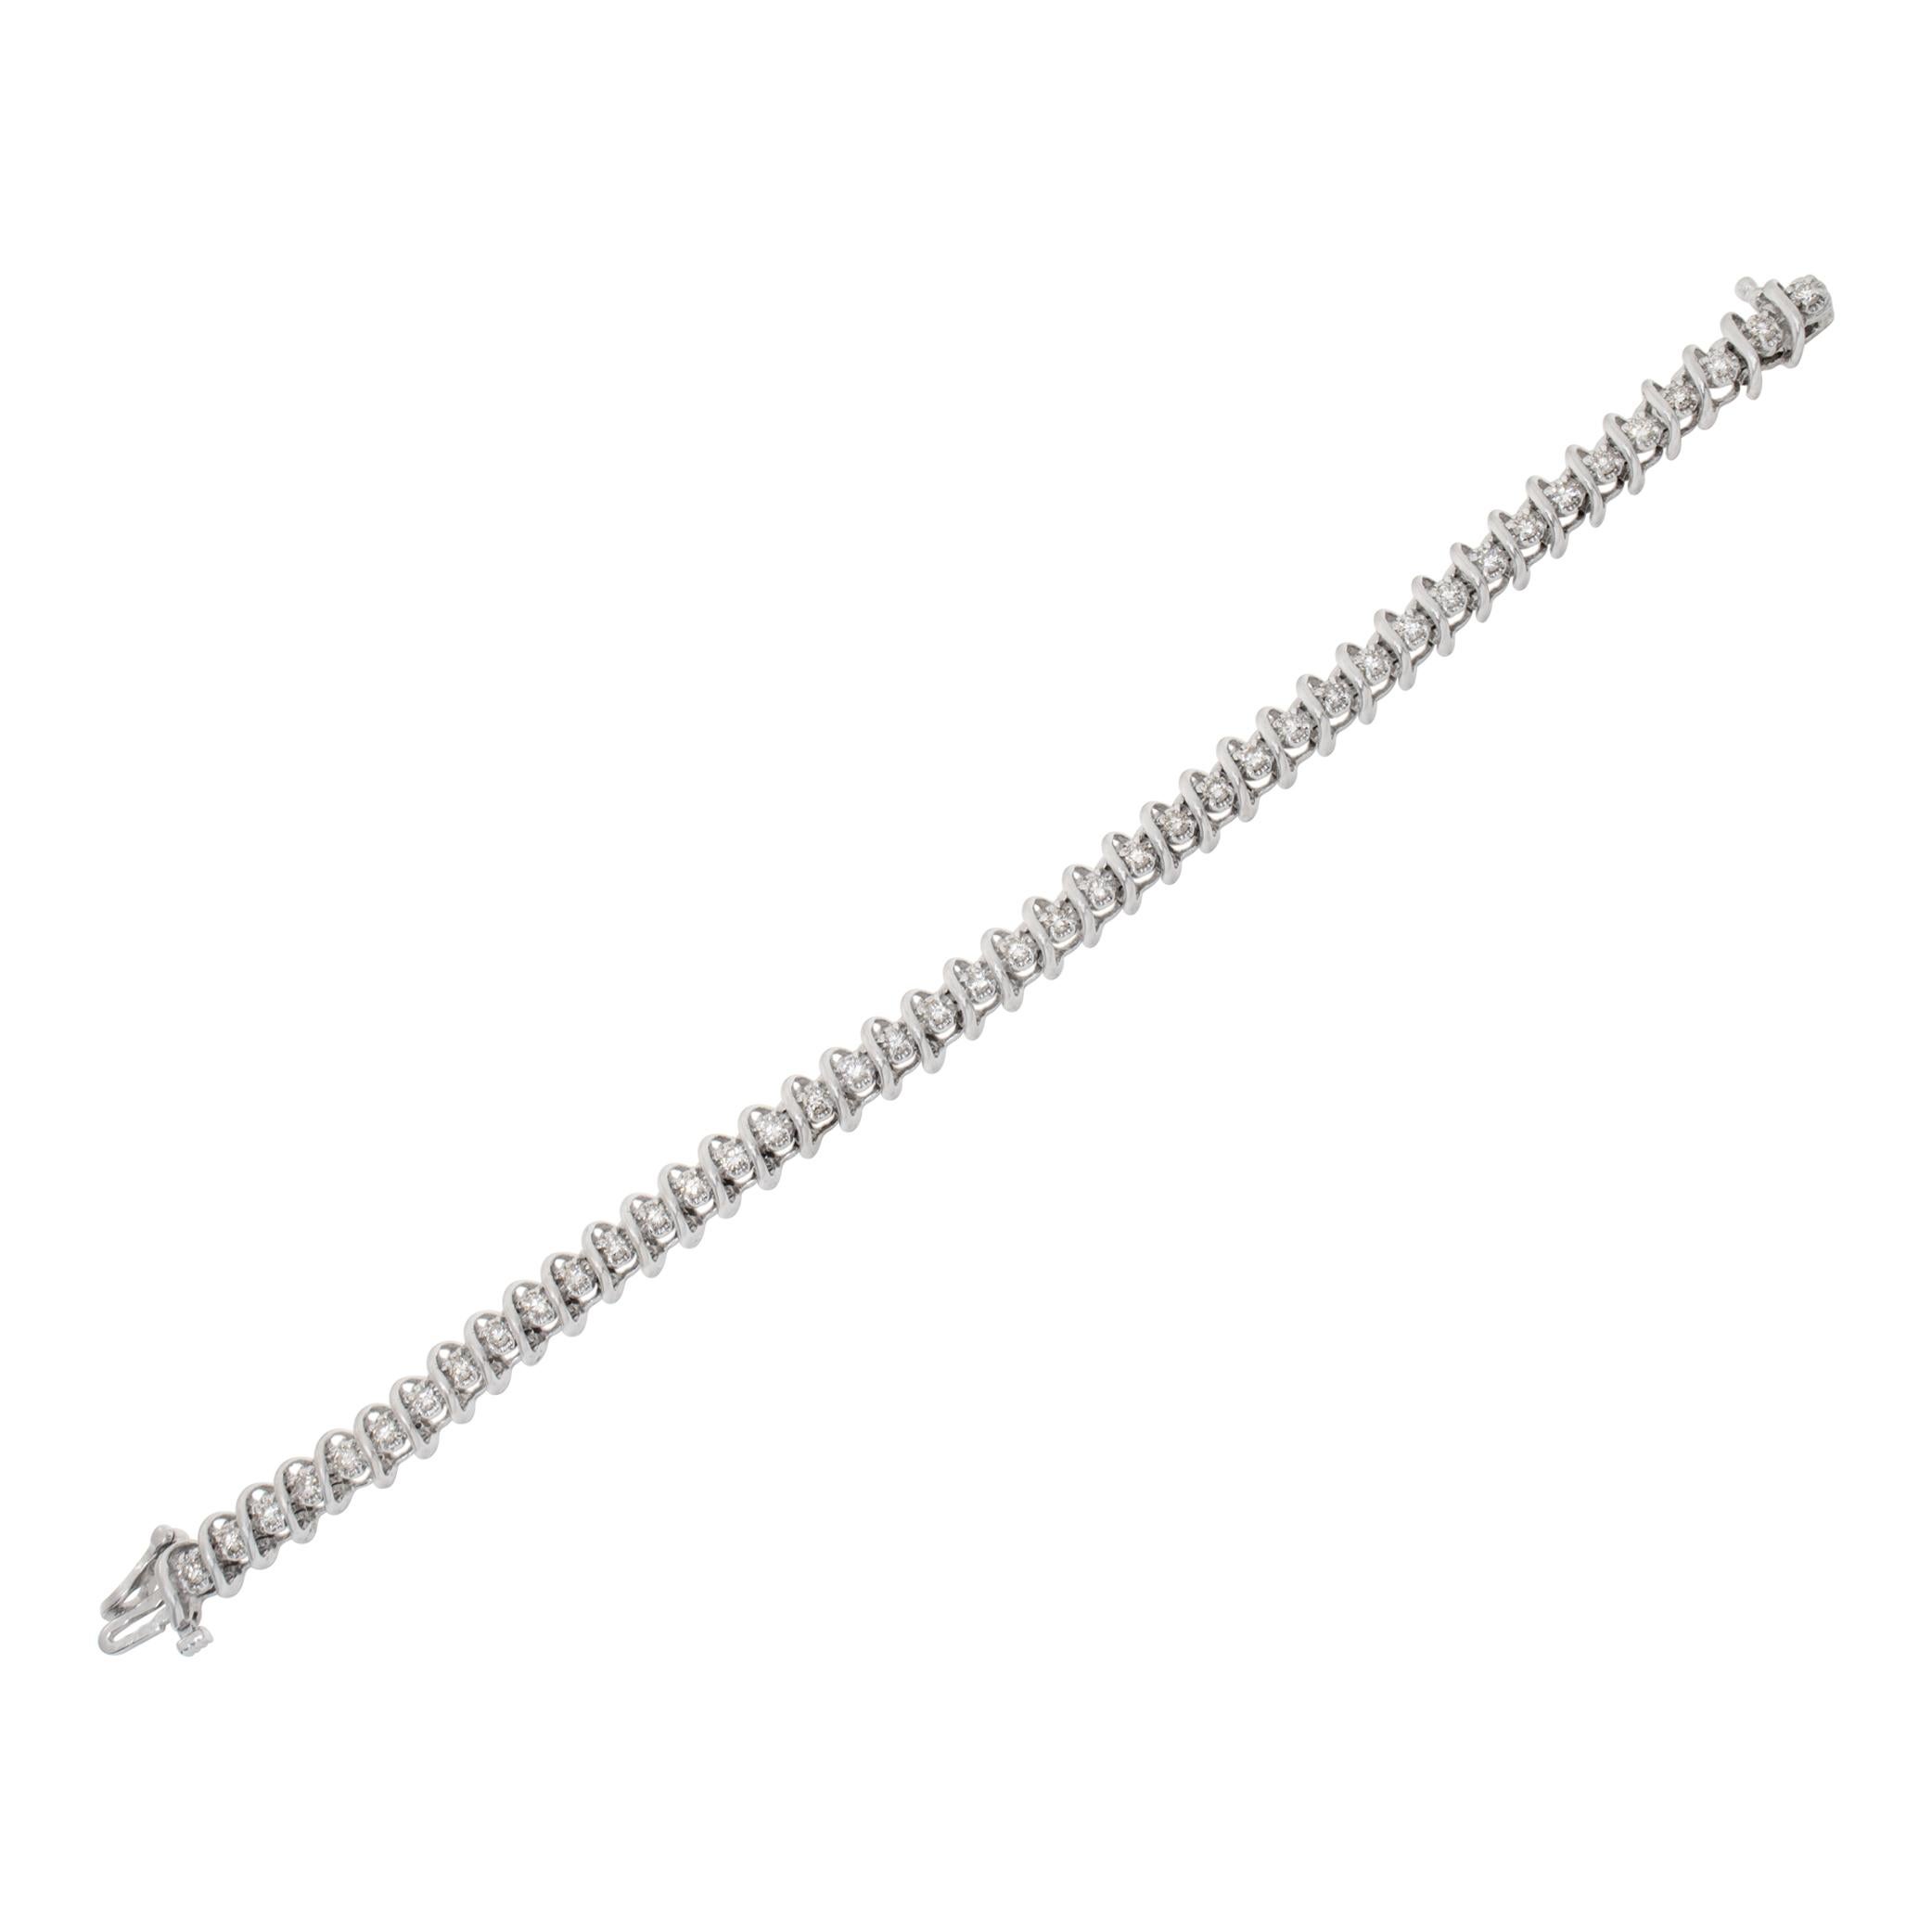 Diamond line bracelet in 14k white gold with approximately 2 carats in round diamonds H-I Color, SI2 Clarity. Length 7.25 inches.